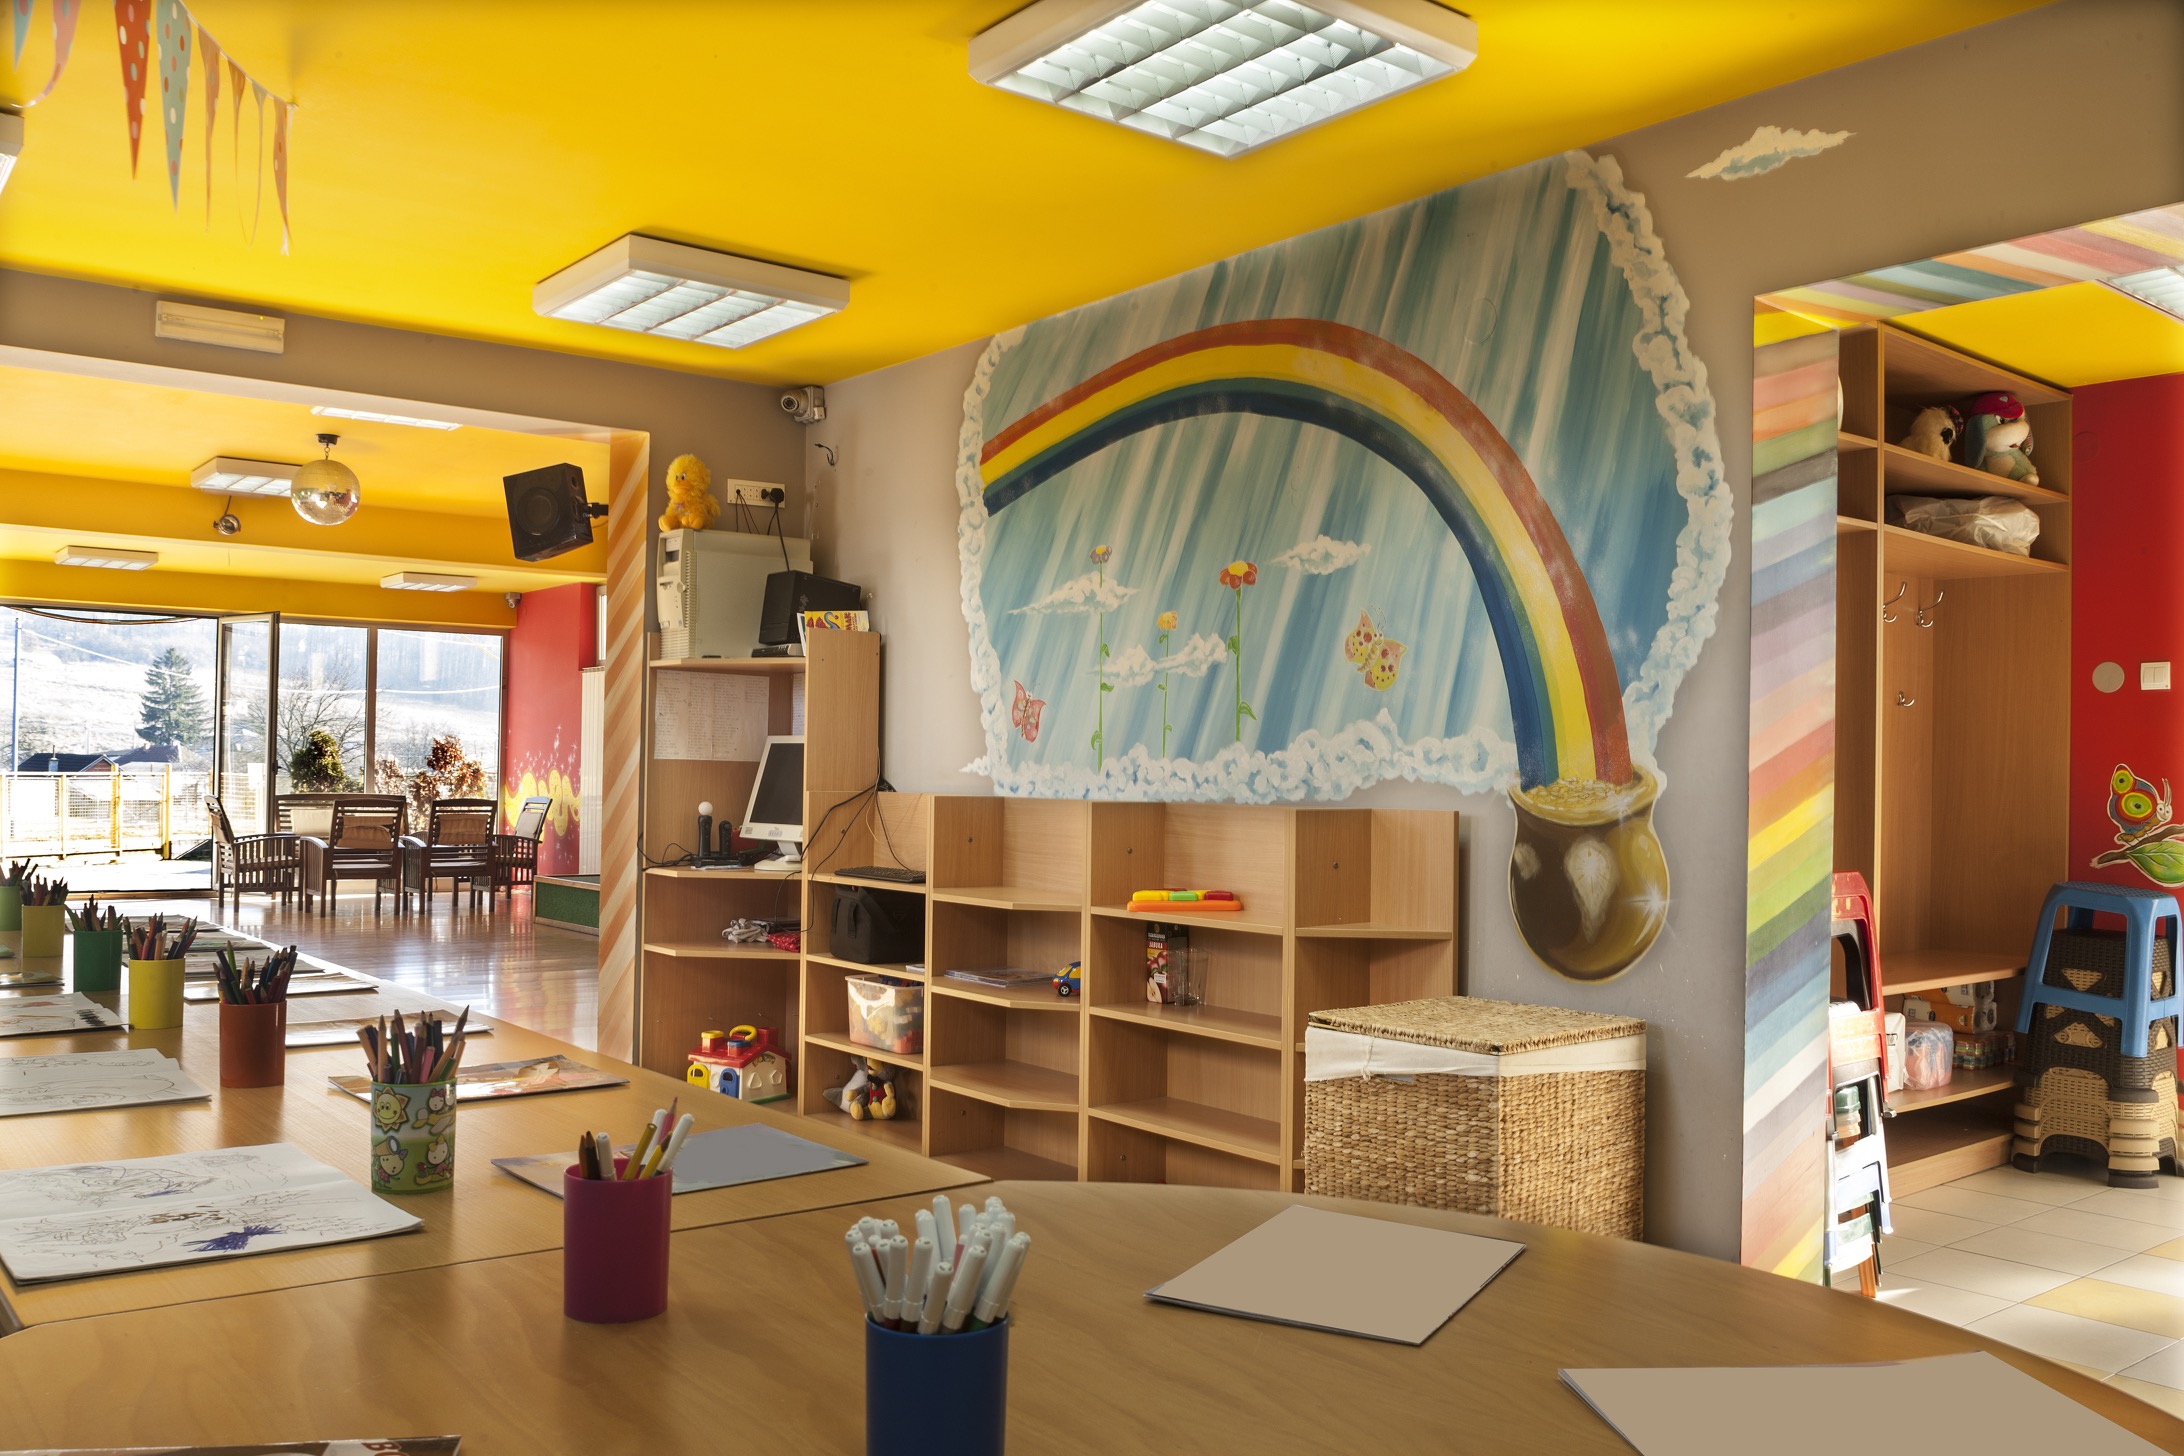 A-day-care-center-for-children-with-mottled-walls-and-lots-of-toys-Image